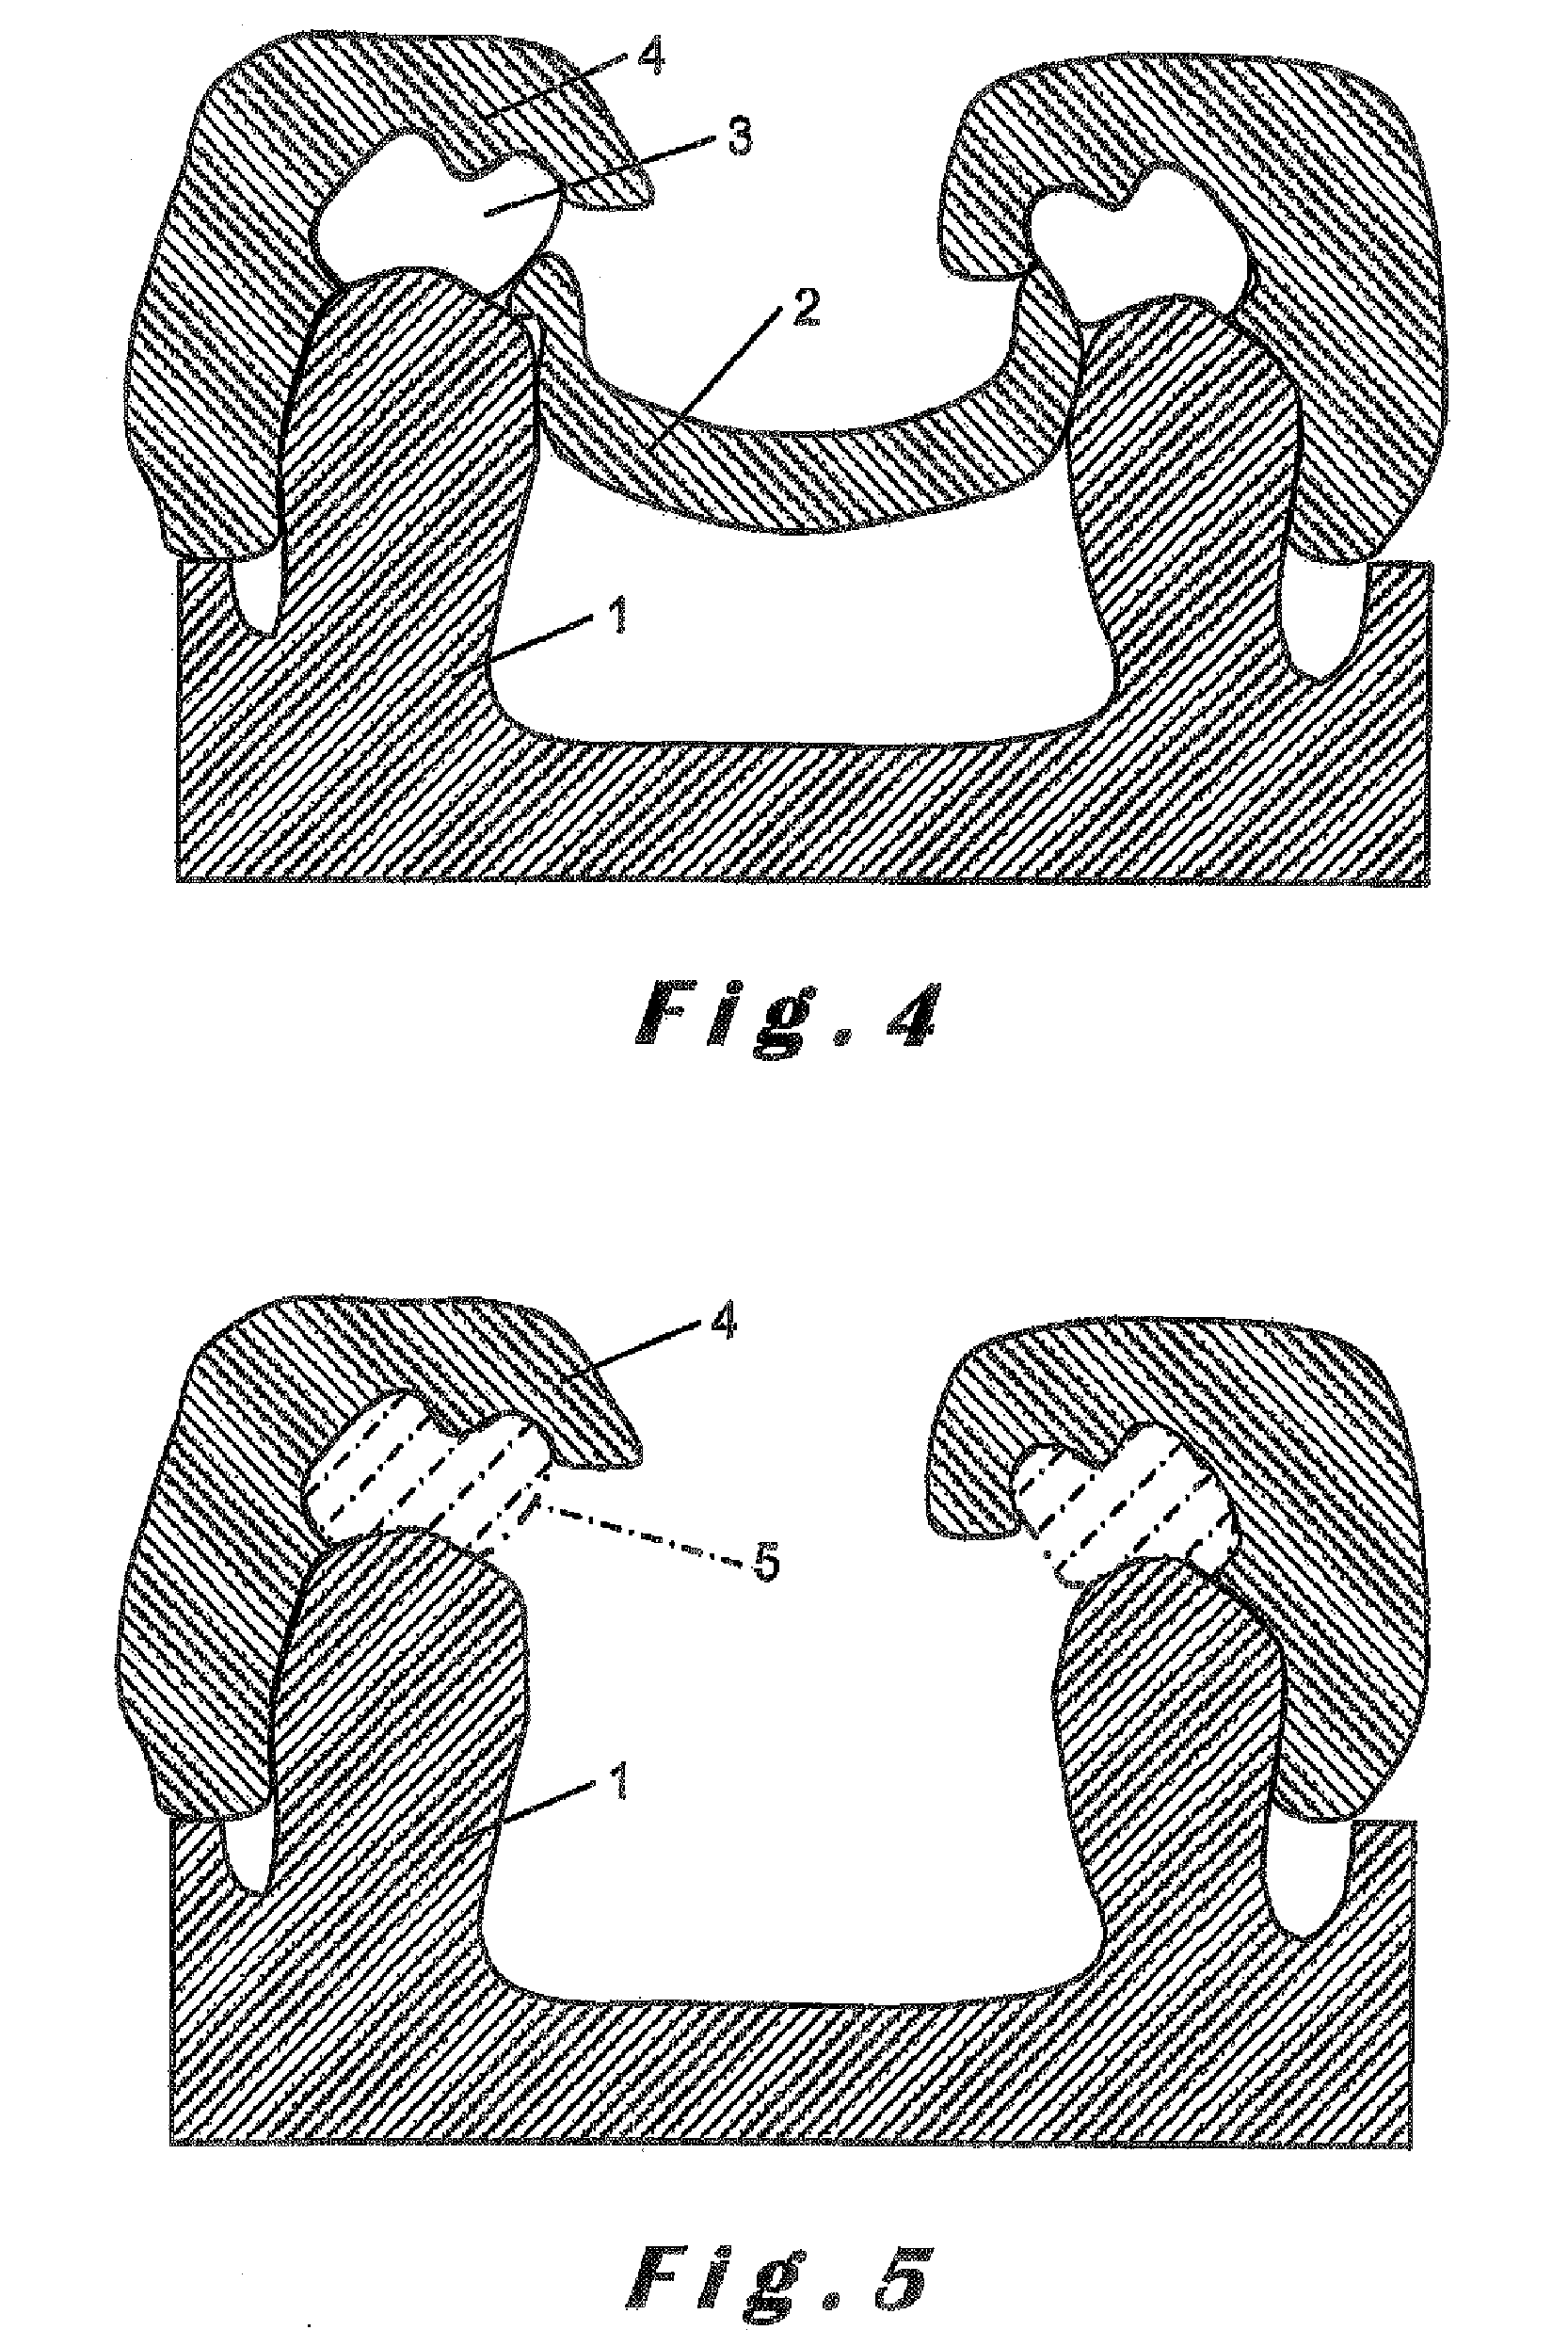 Method for manufacturing a dental prosthesis and an appliance for implantation thereof